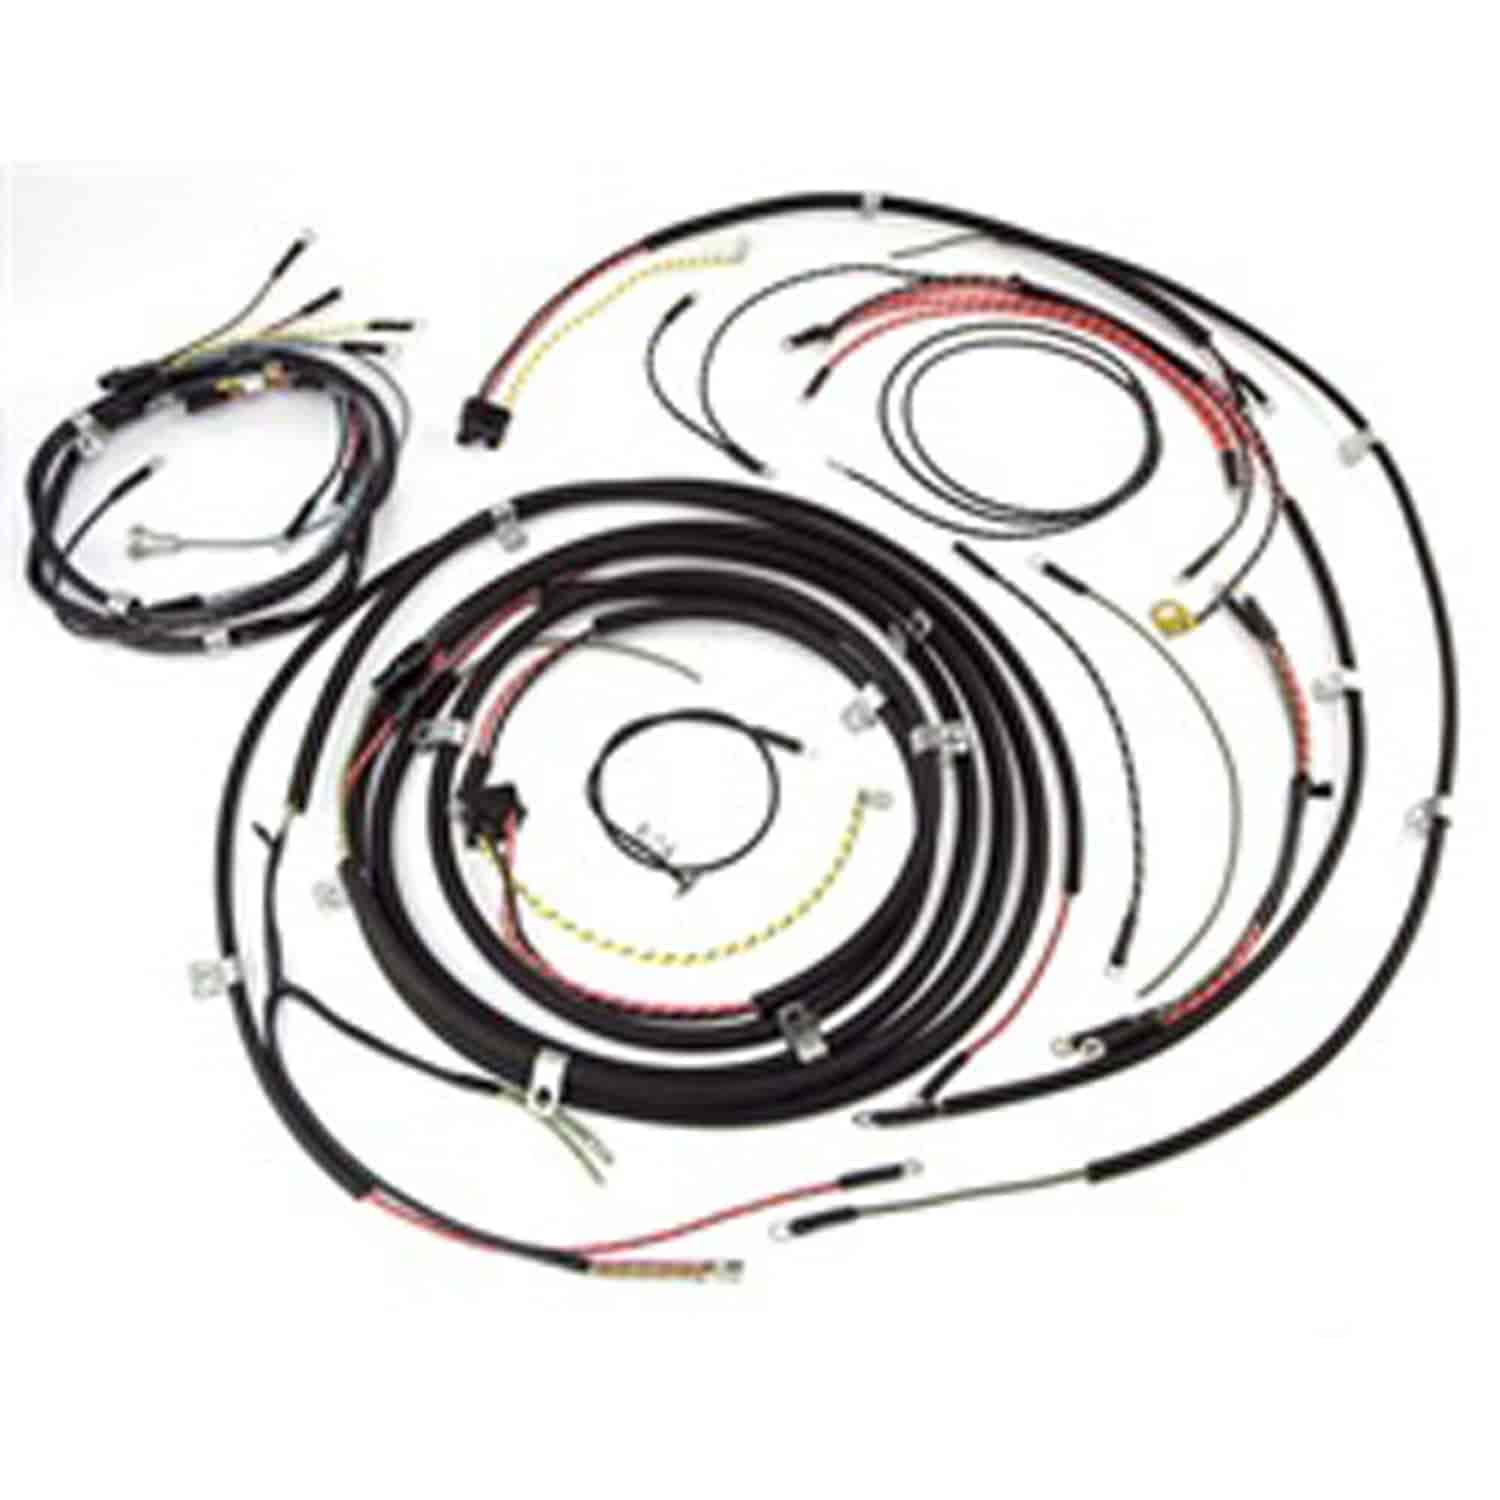 Complete Wiring Harness Without Turn Signals 1948-1953 CJ3A